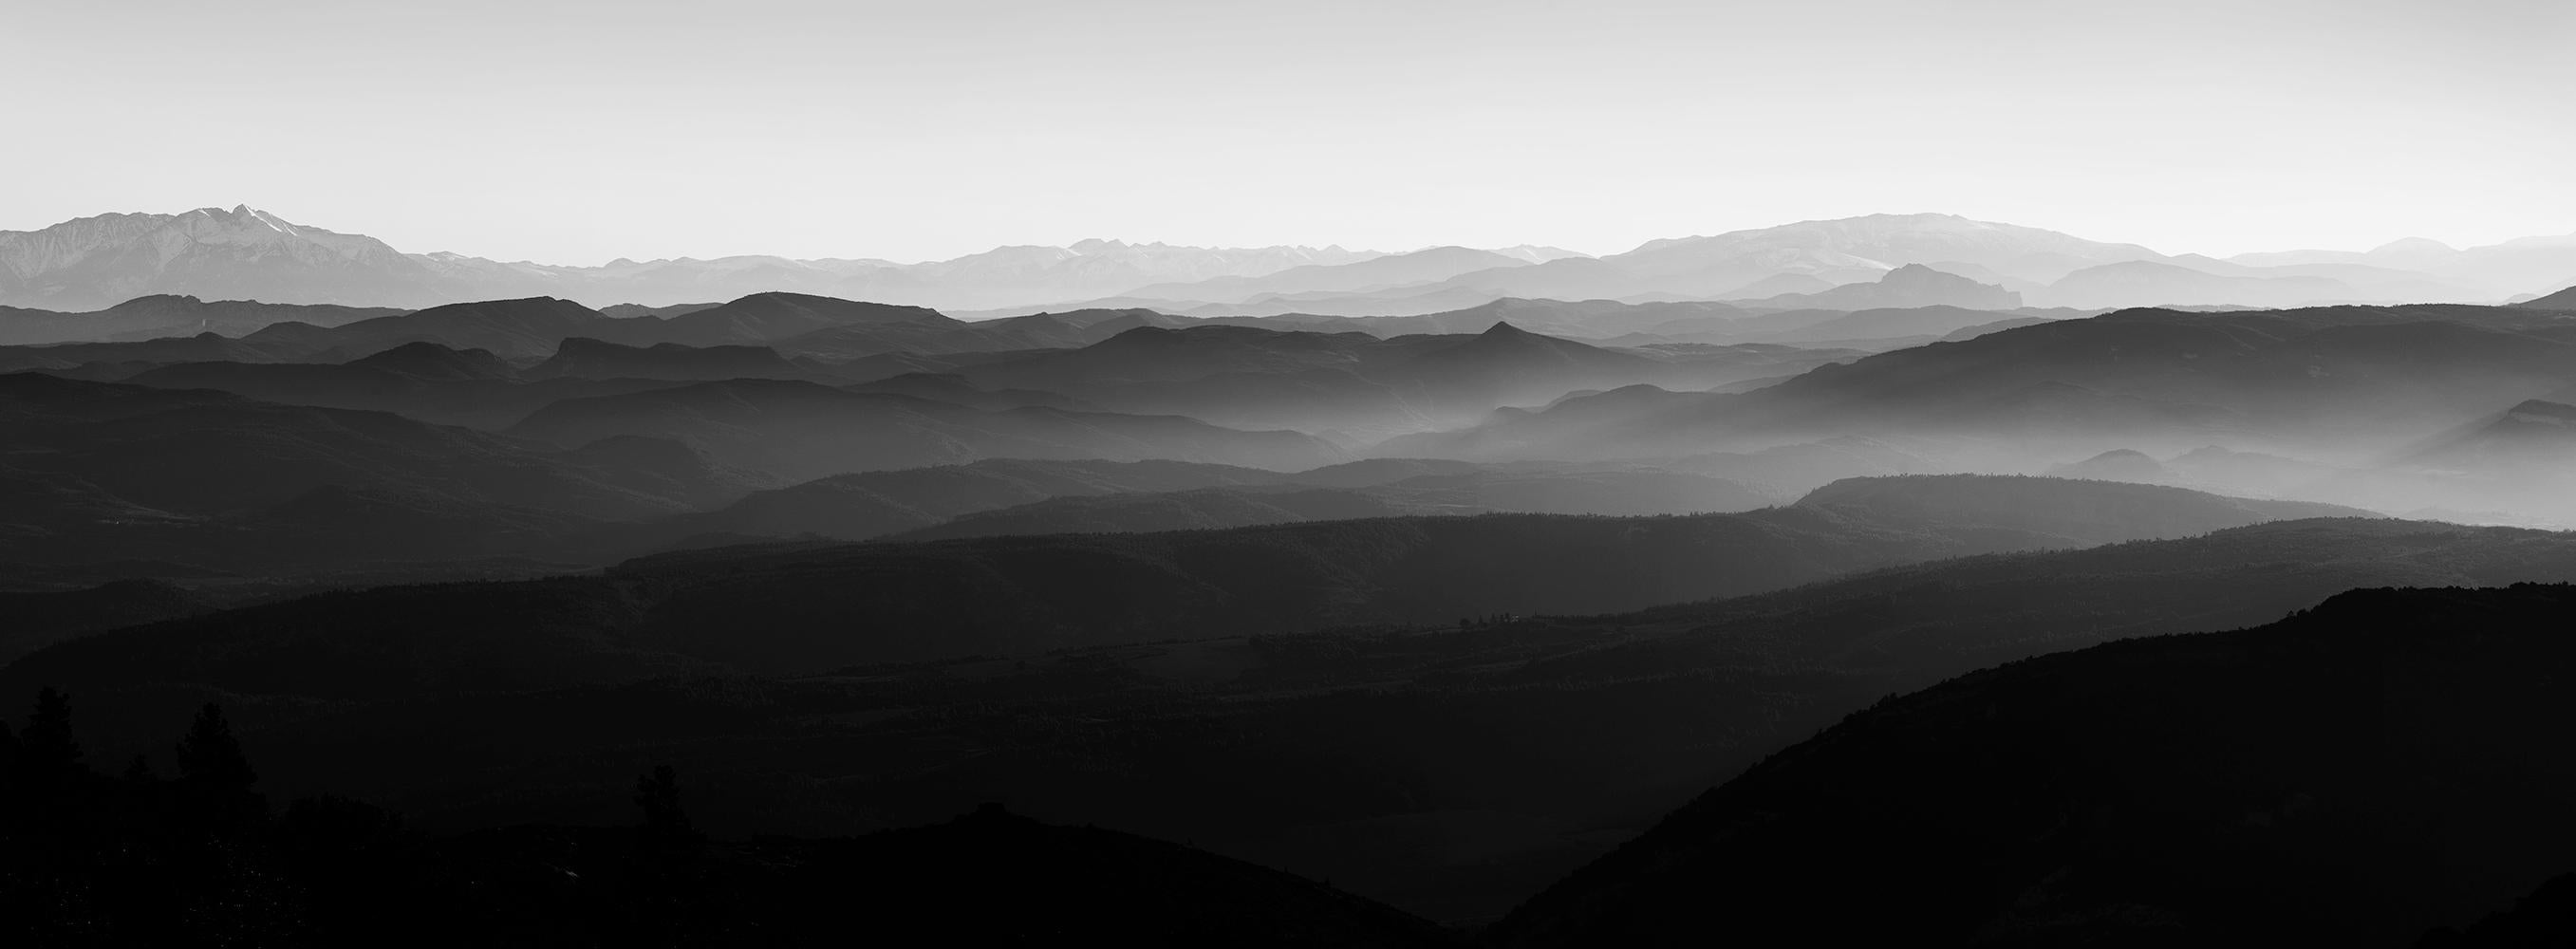 Sam Thomas Black and White Photograph - Les Pyrénées - Signed limited edition abstract art print, Contemporary    